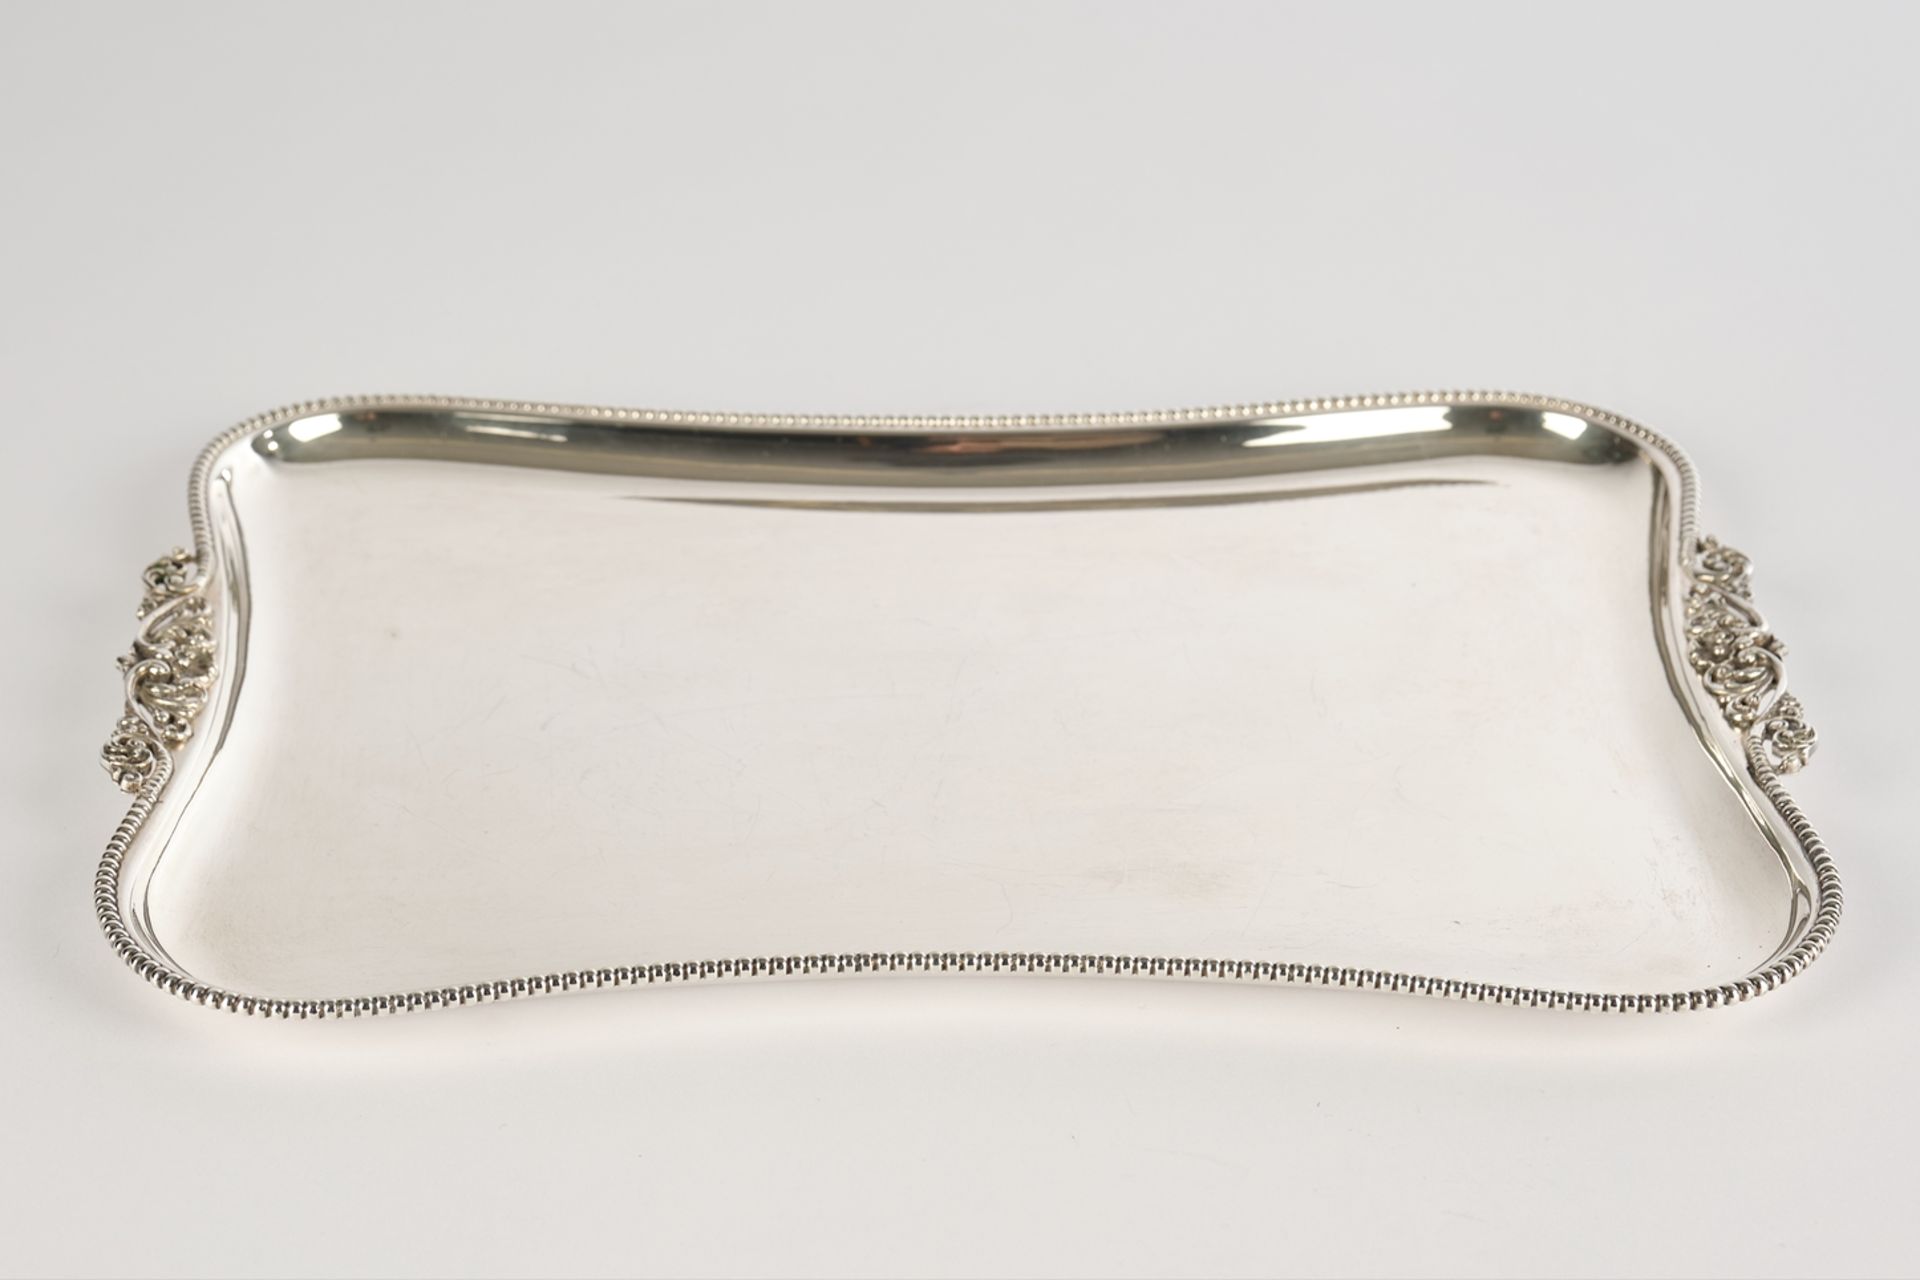 Tablet, 800 silver, Italy, of moulded rectangular form on all sides, beaded rim, handles with scrol